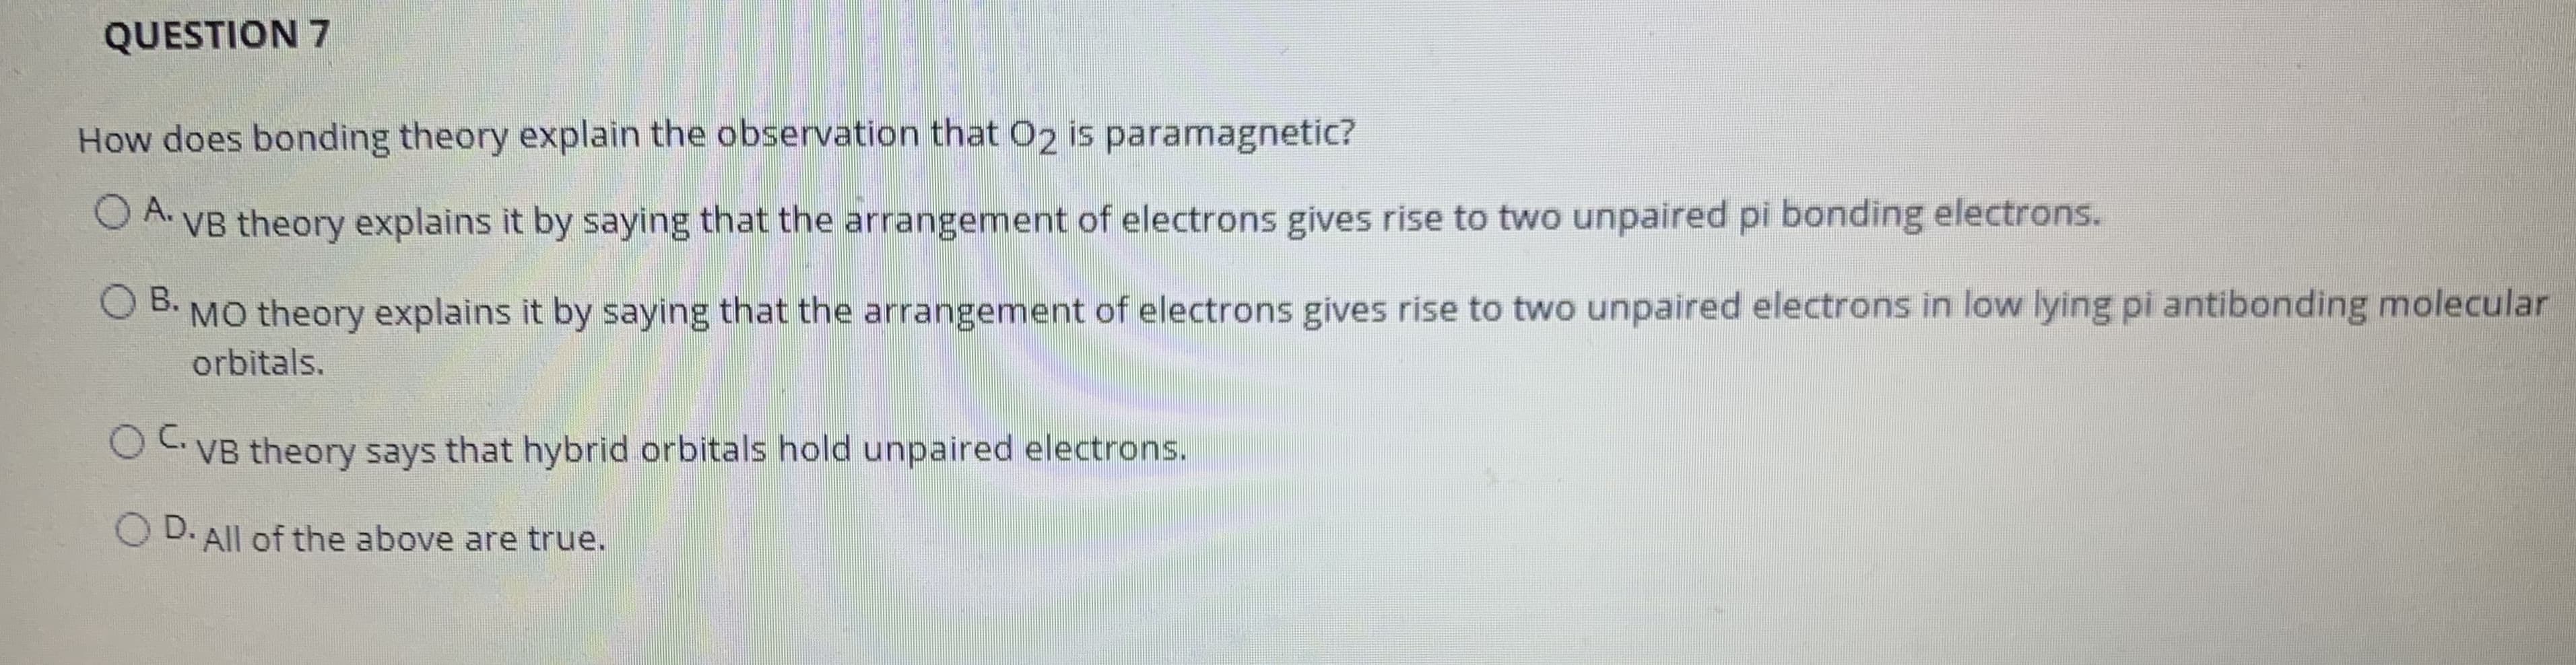 How does bonding theory explain the observation that 02 is paramagnetic?
O A.
VB theory explains it by saying that the arrangement of electrons gives rise to two unpaired pi bonding electrons.
